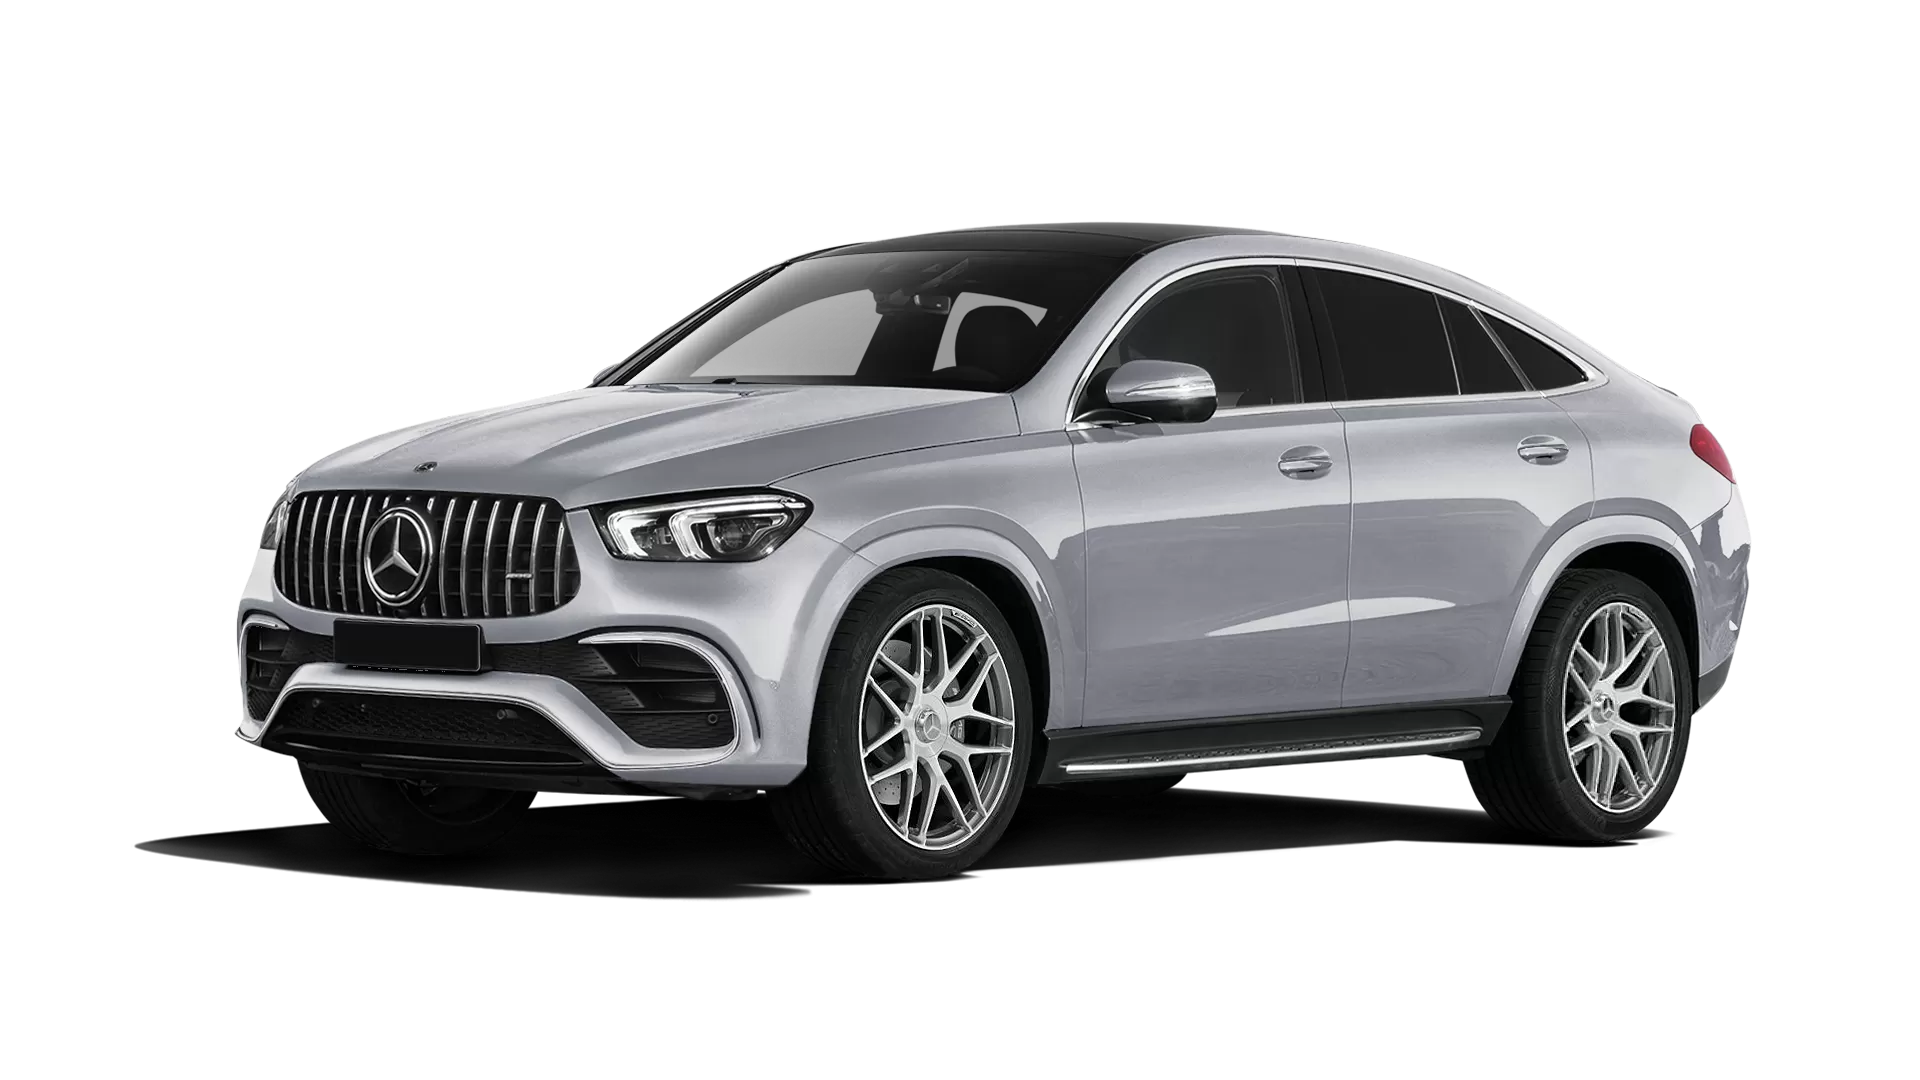 Mercedes GLE Coupe AMG 63 C167 stock front view in High Tech Silver color